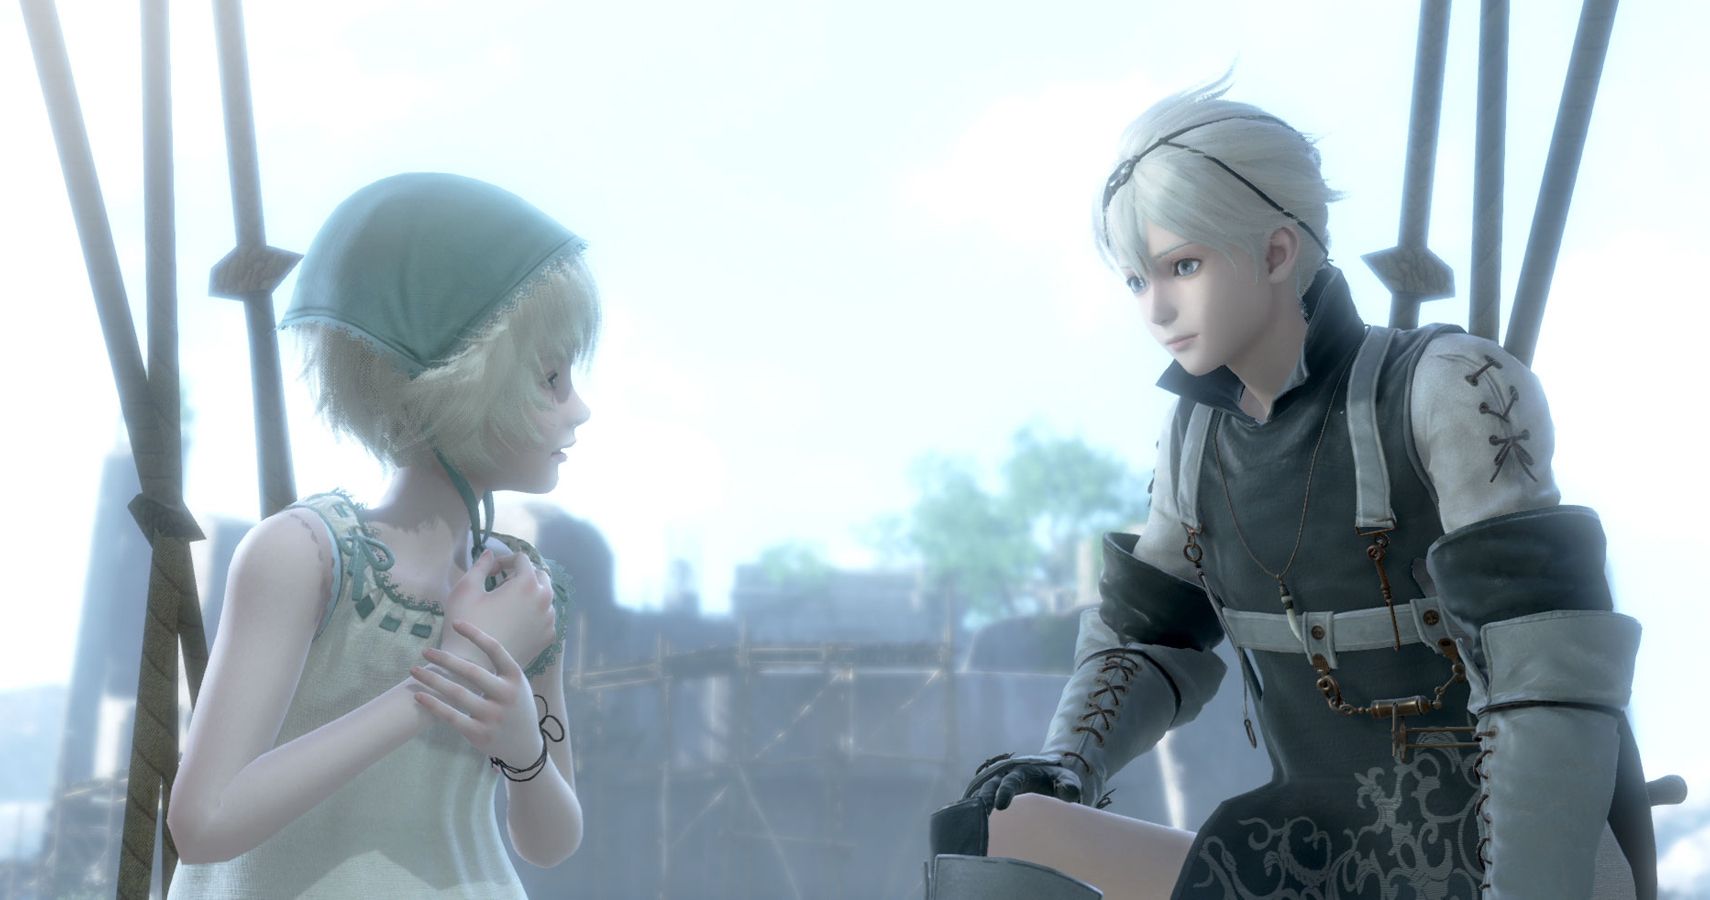 Nier Replicant Preview: The Execution Nier's Story Always Deserved